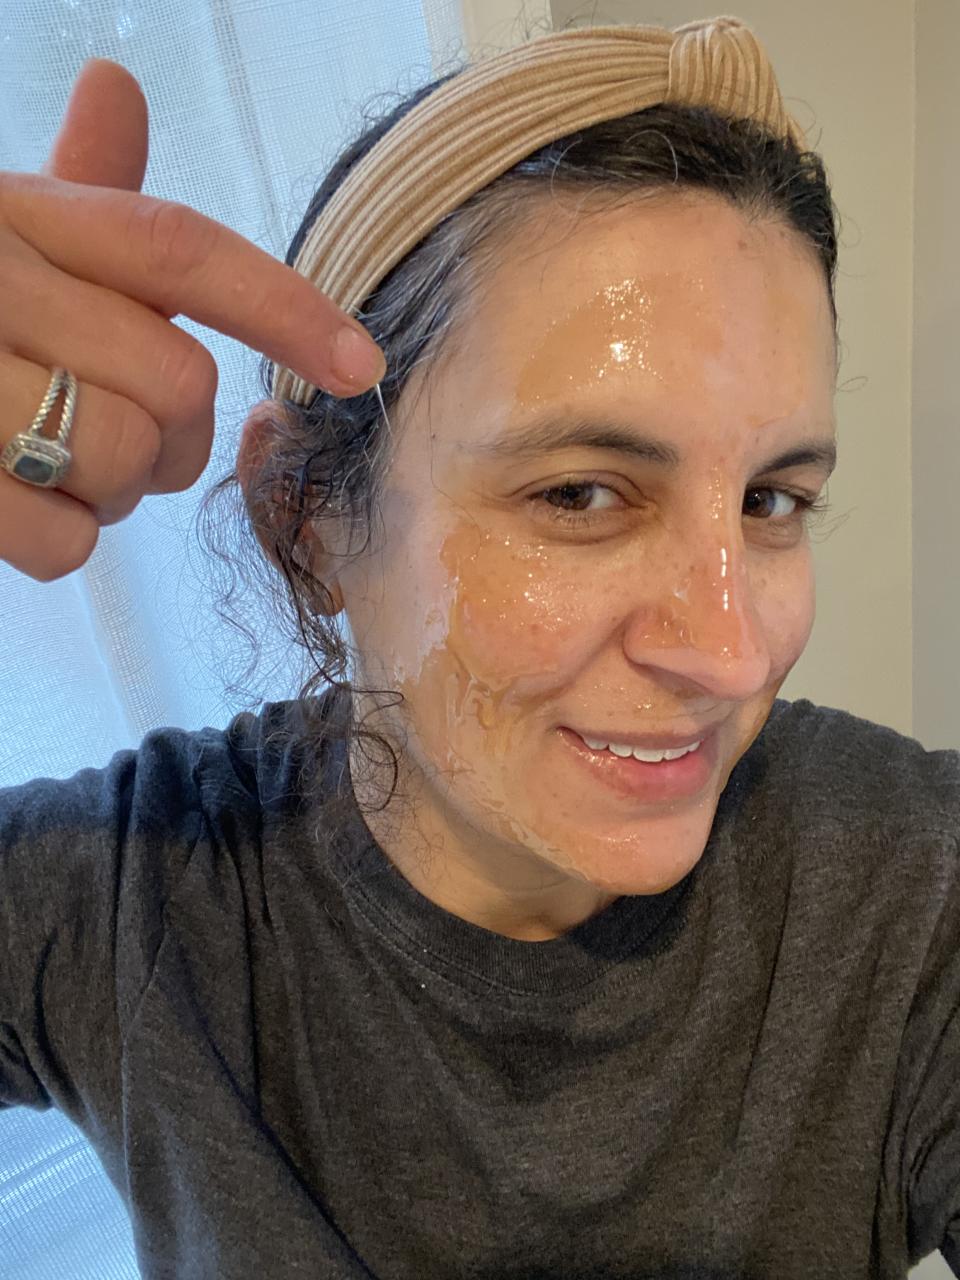 After slathering my face with honey, my husband said my skin looked radiant. (Photo: Jamie Davis Smith)